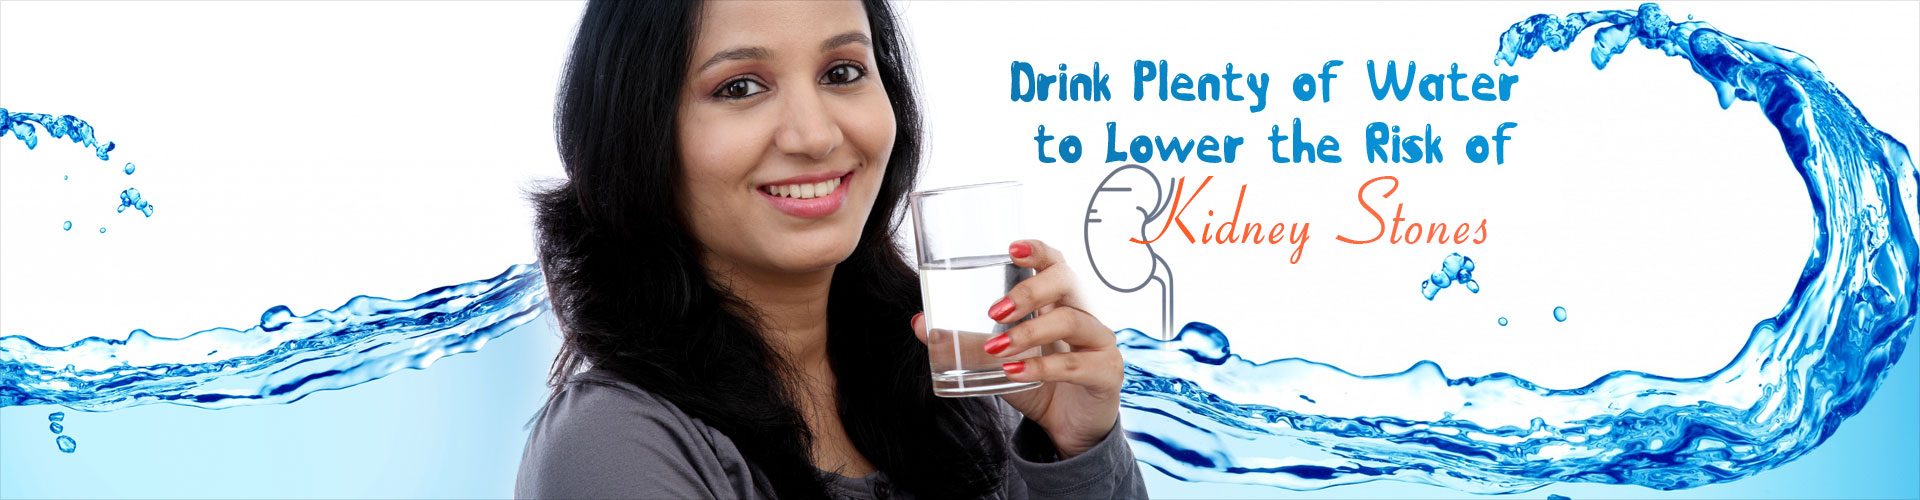 Drink Plenty of Water to Lower the Risk of Kidney Stones 